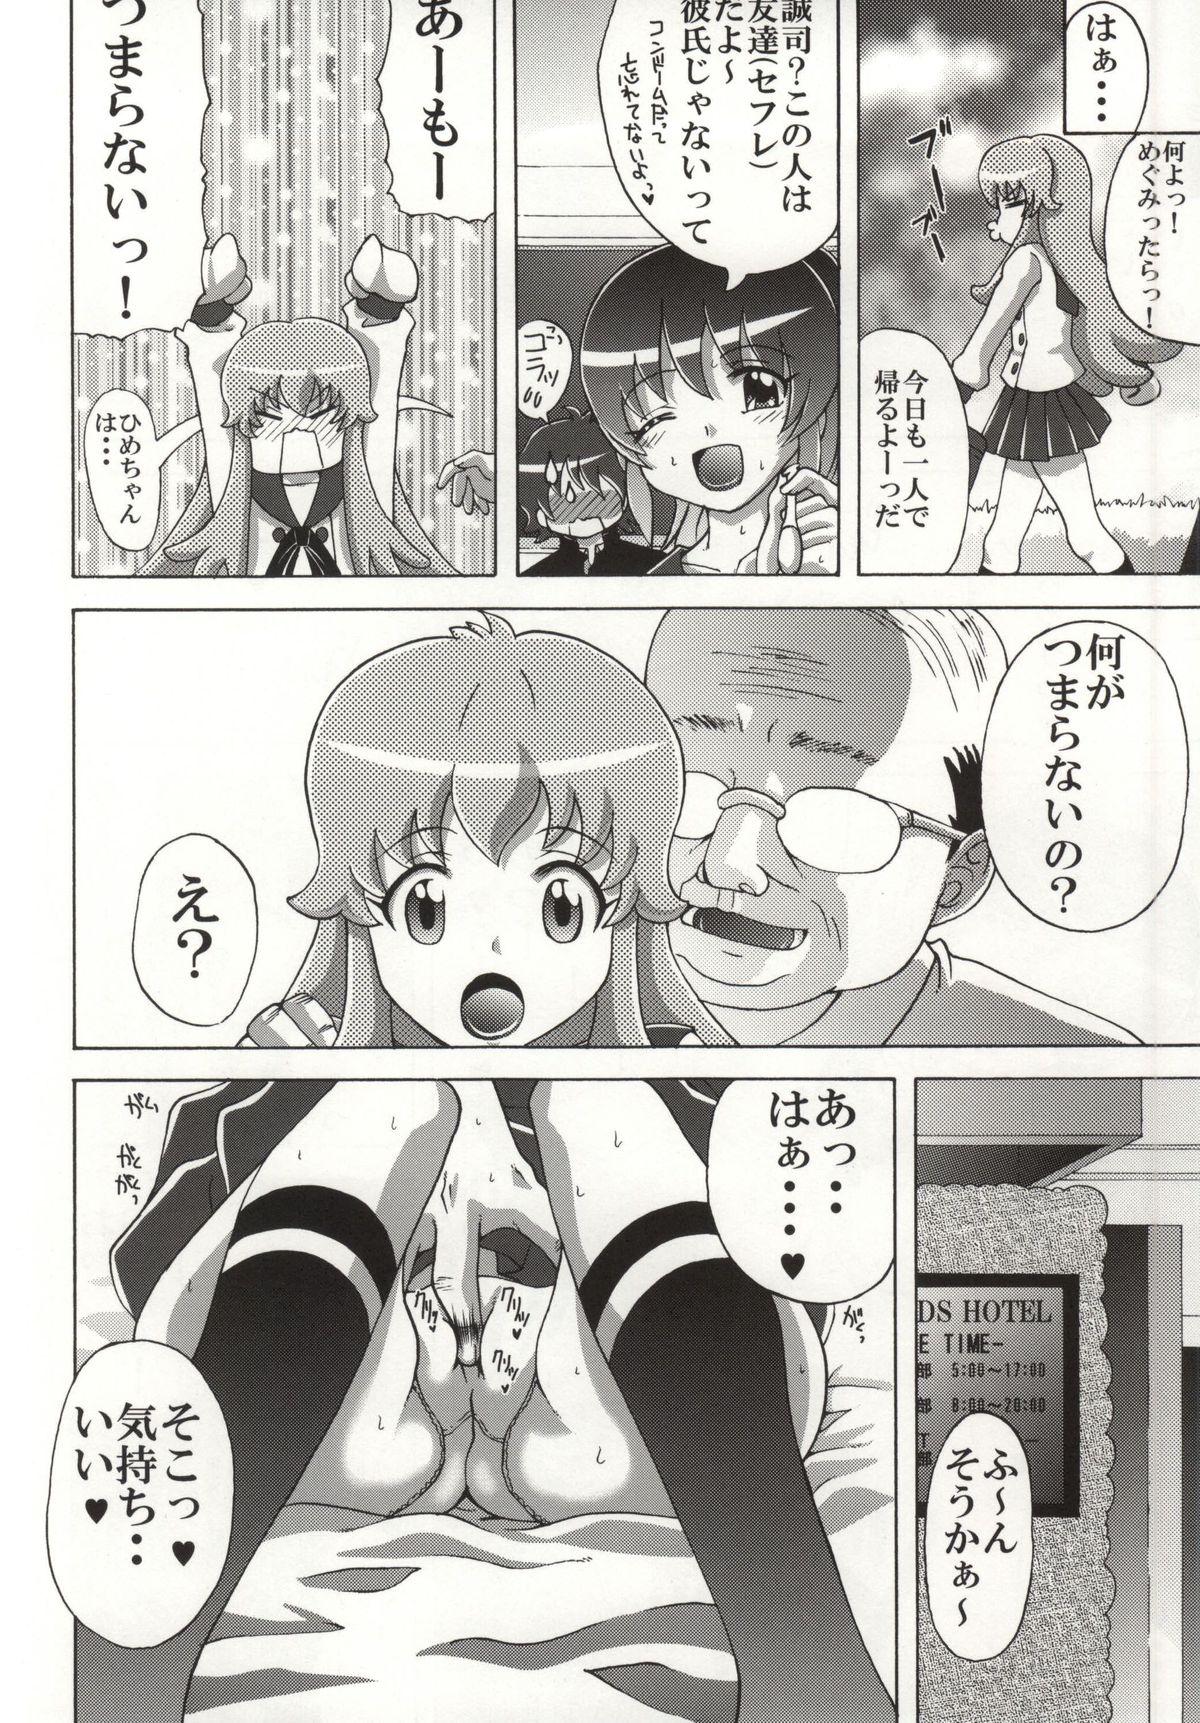 Forbidden Hime-chan no Tomodachi - Happinesscharge precure Suckingdick - Page 3